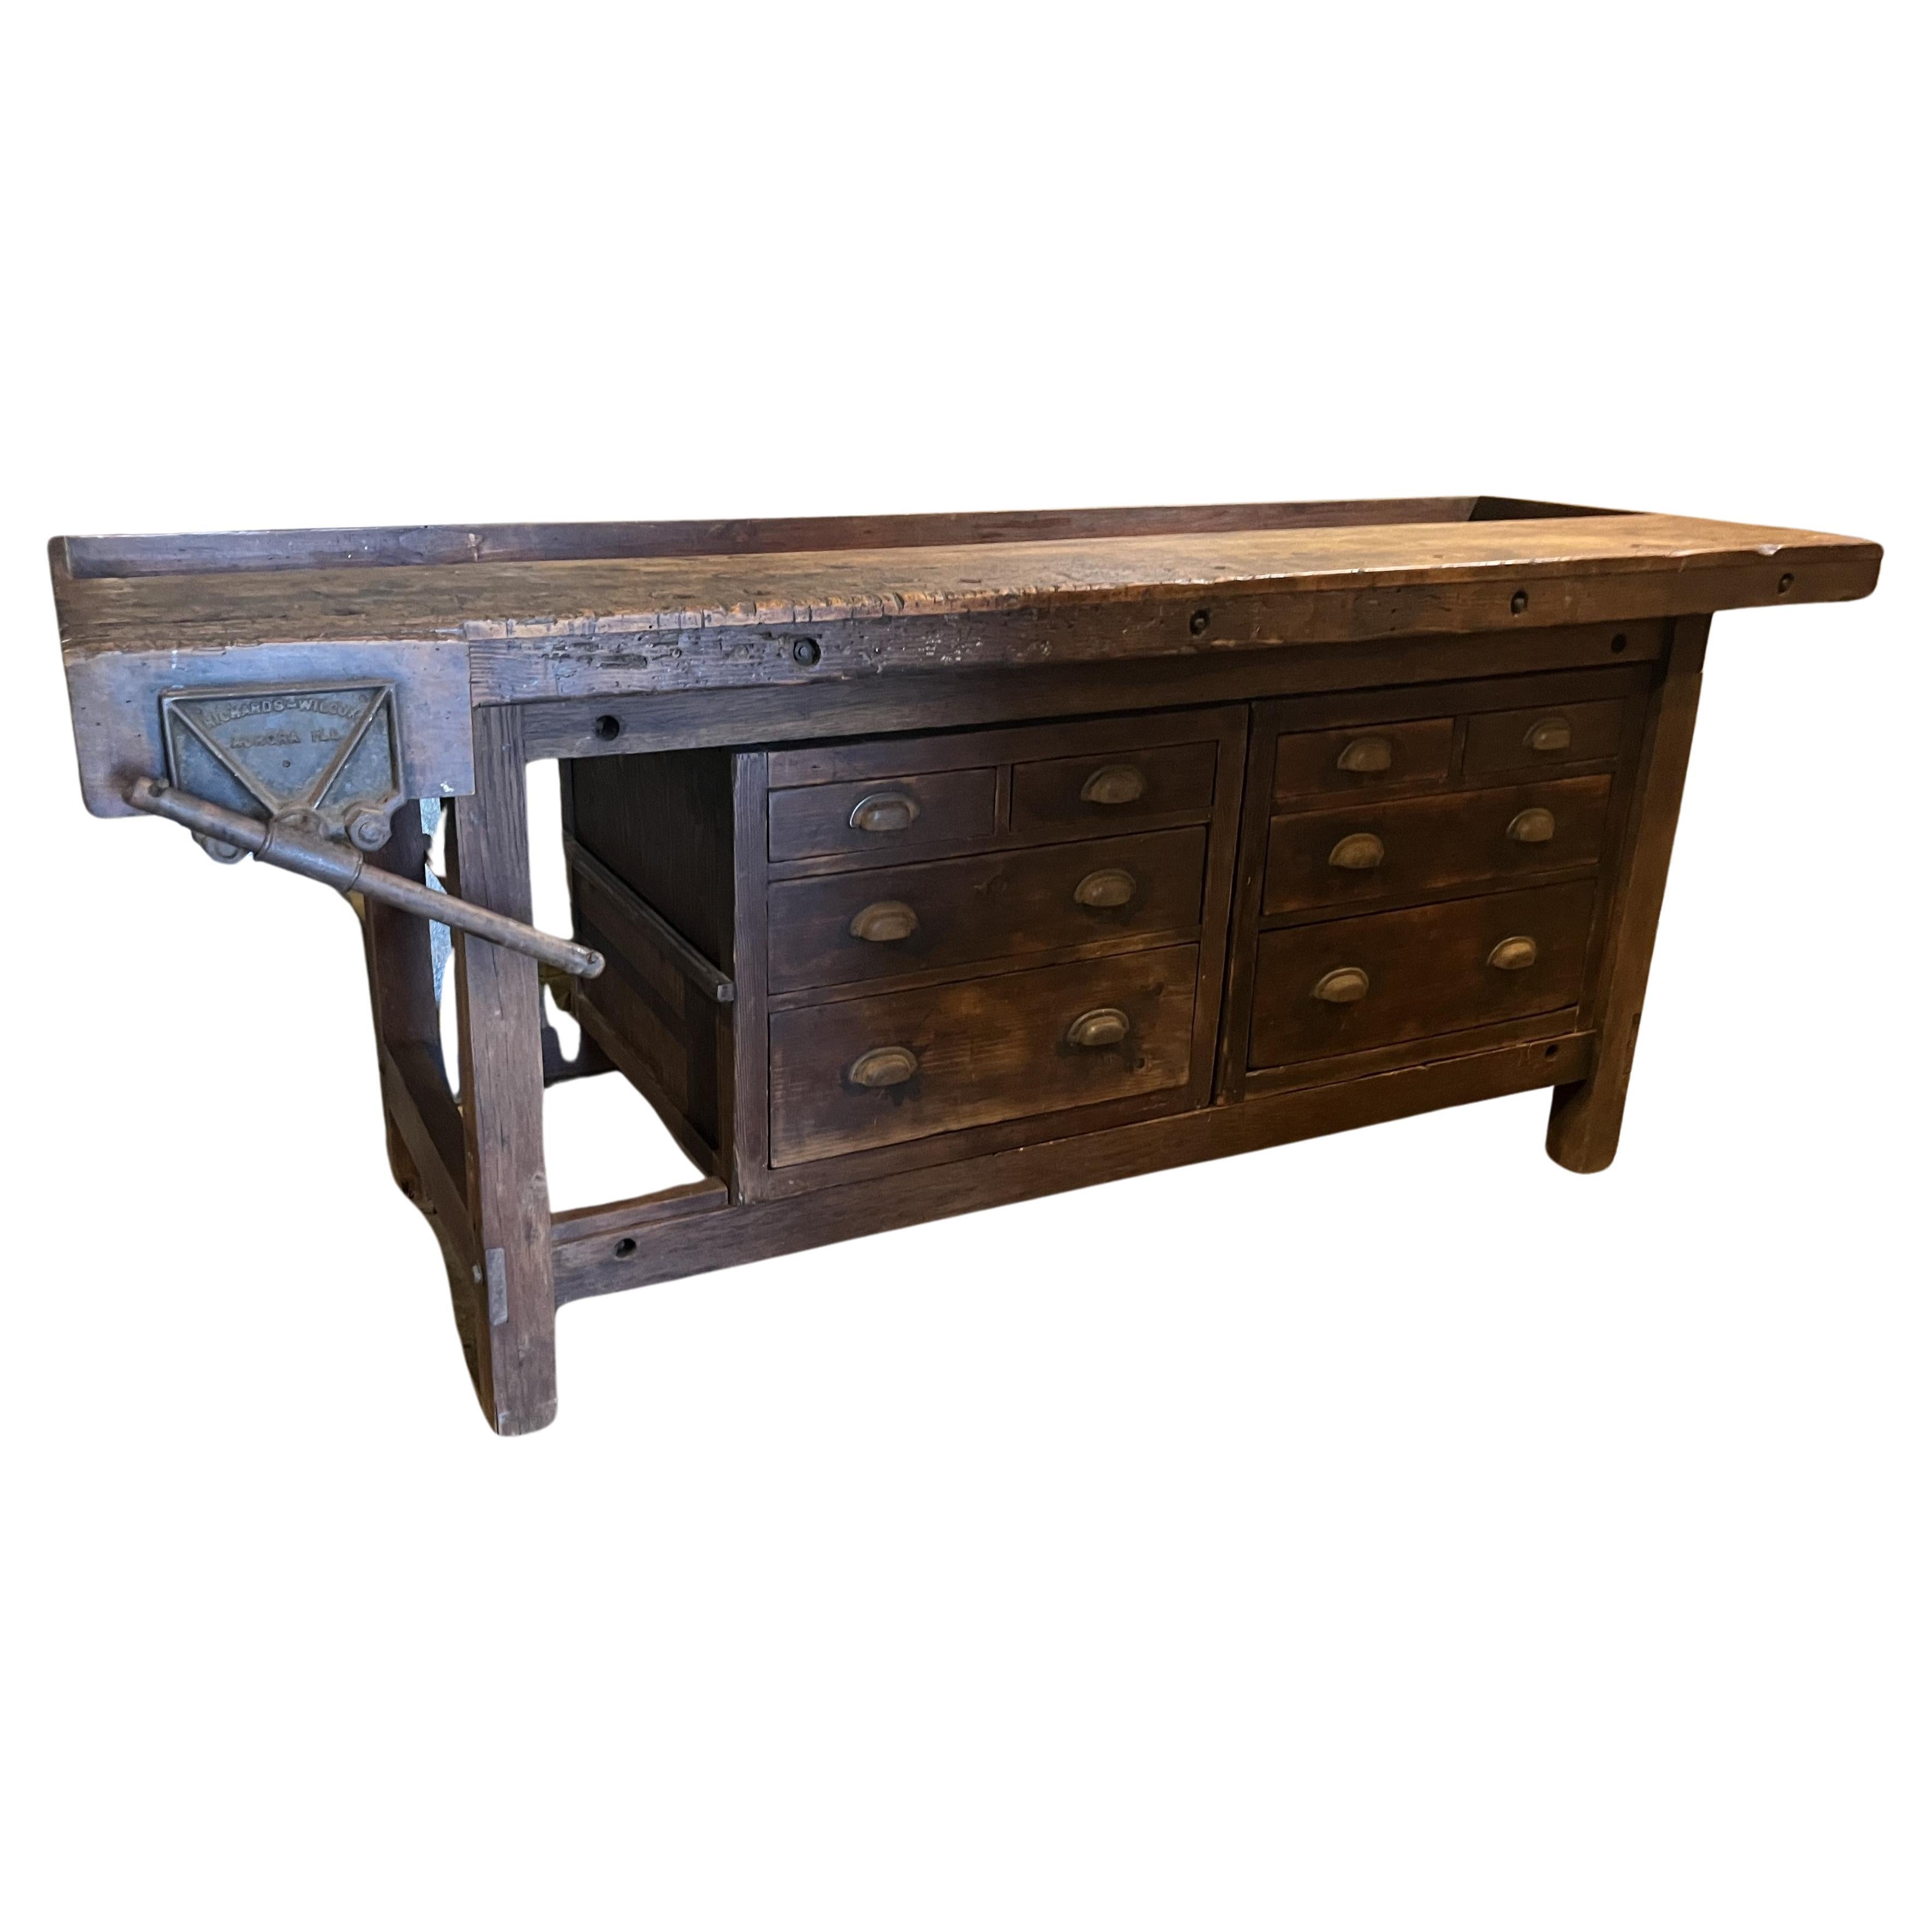 Early 20th Century American Work Bench